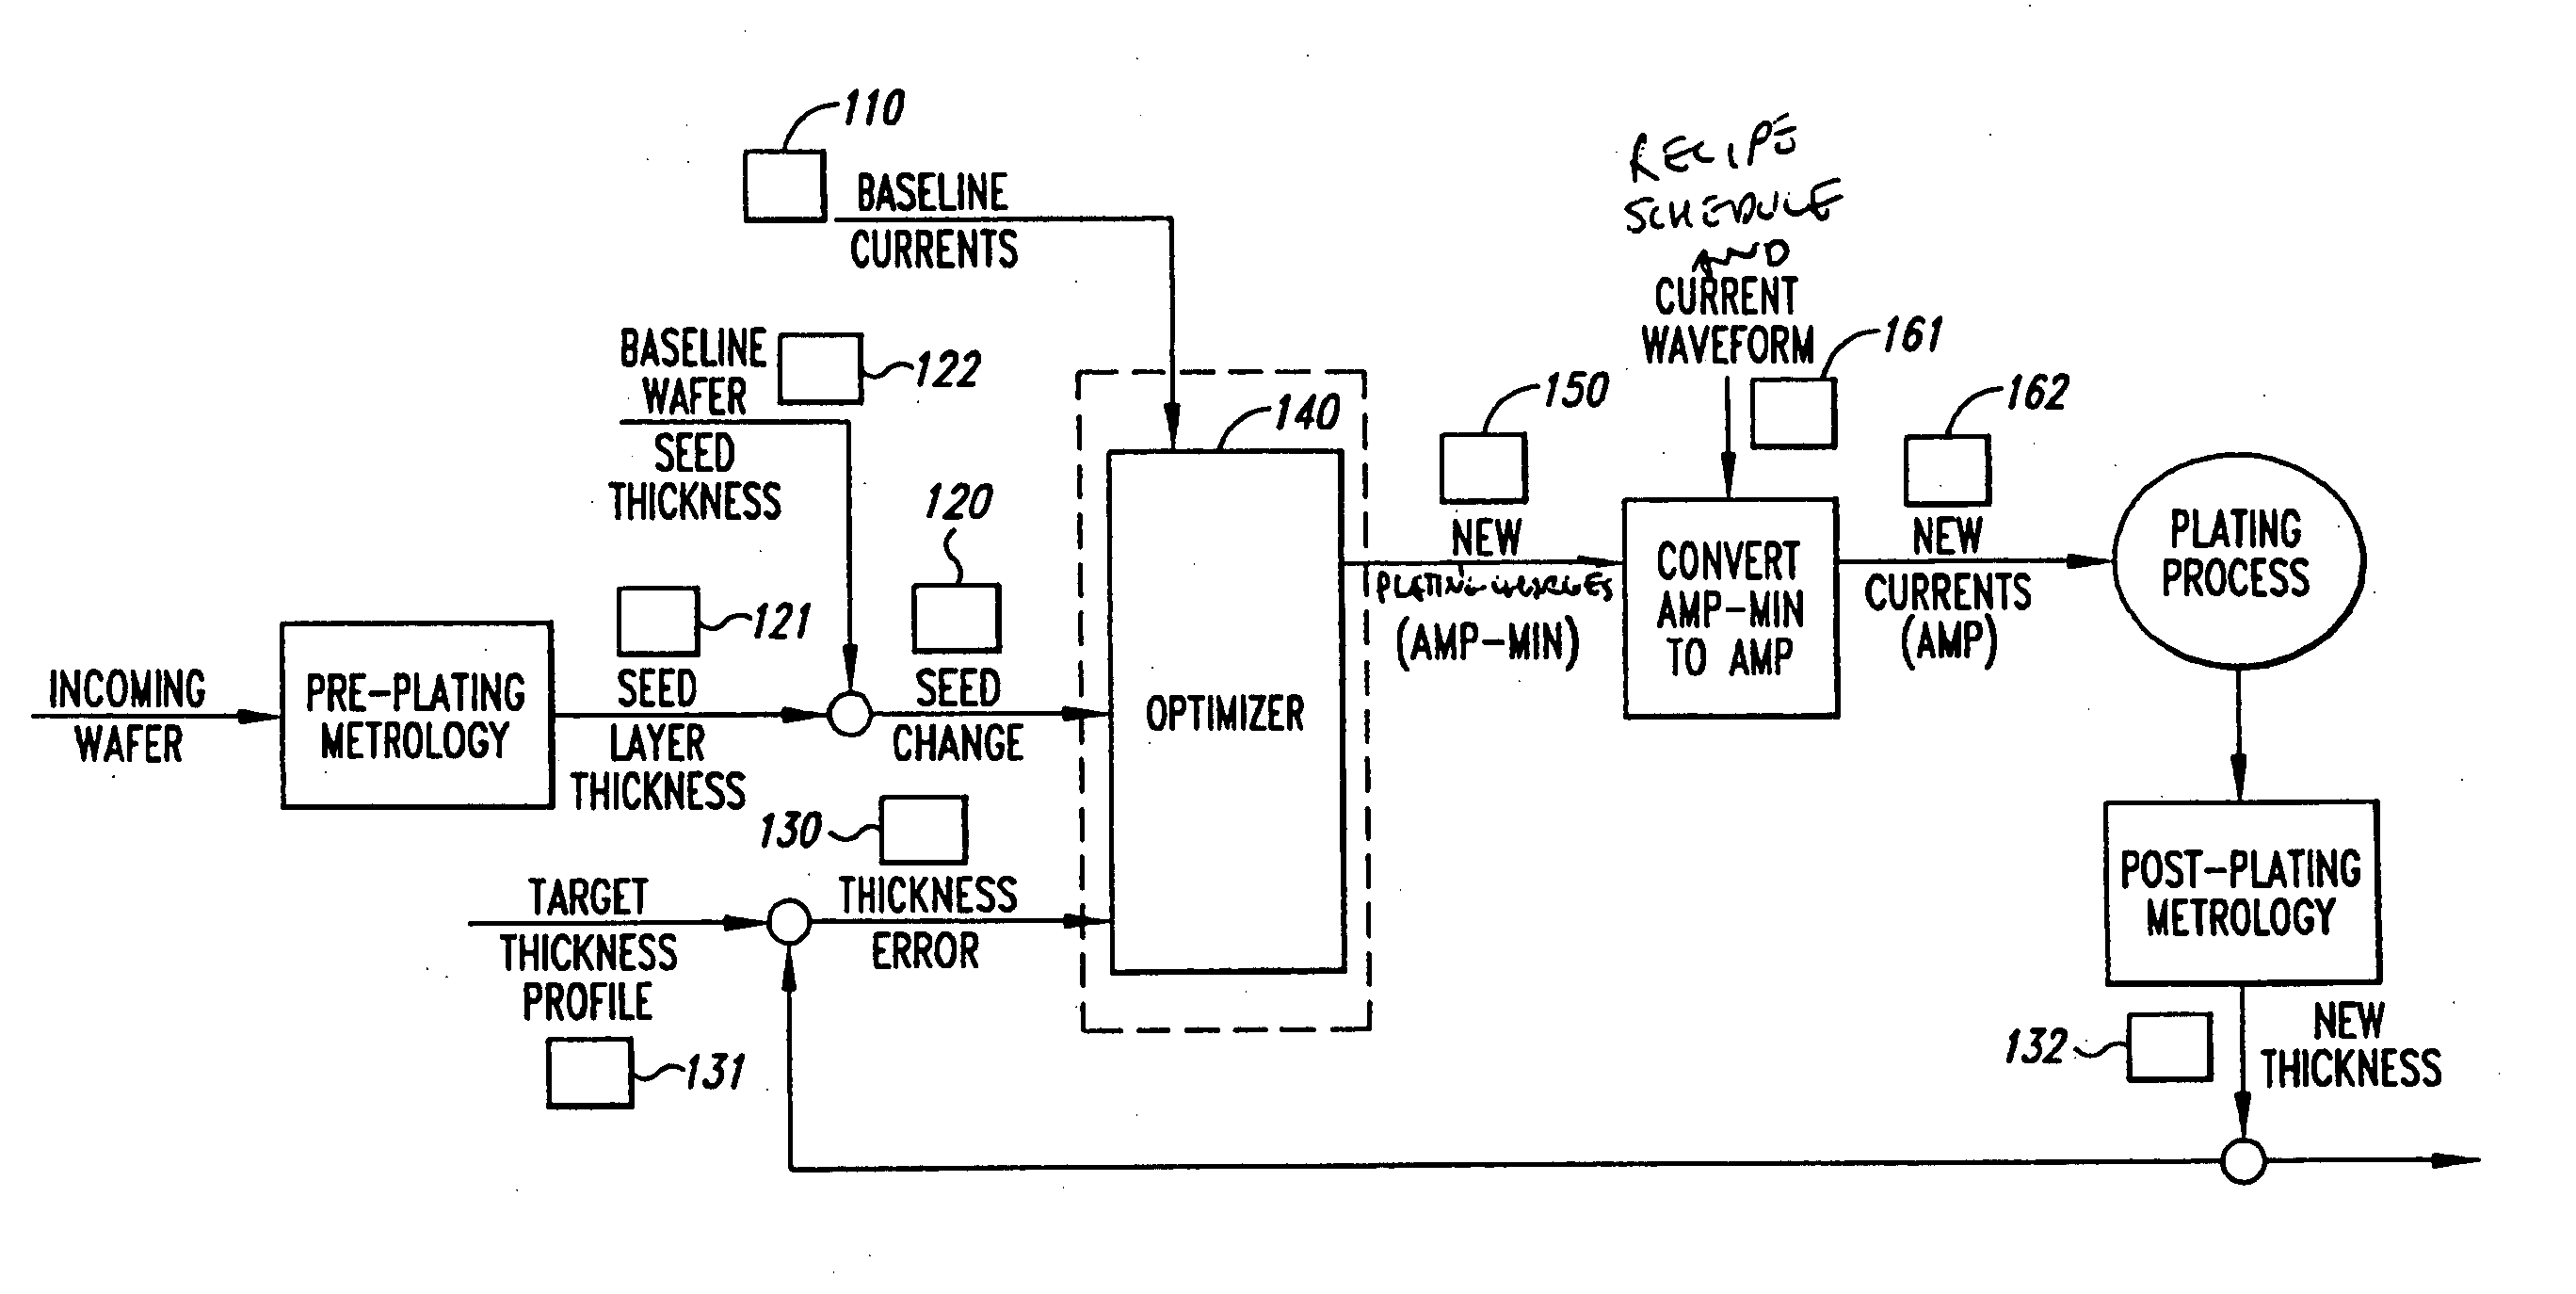 Tuning electrodes used in a reactor for electrochemically processing a microelectronic workpiece